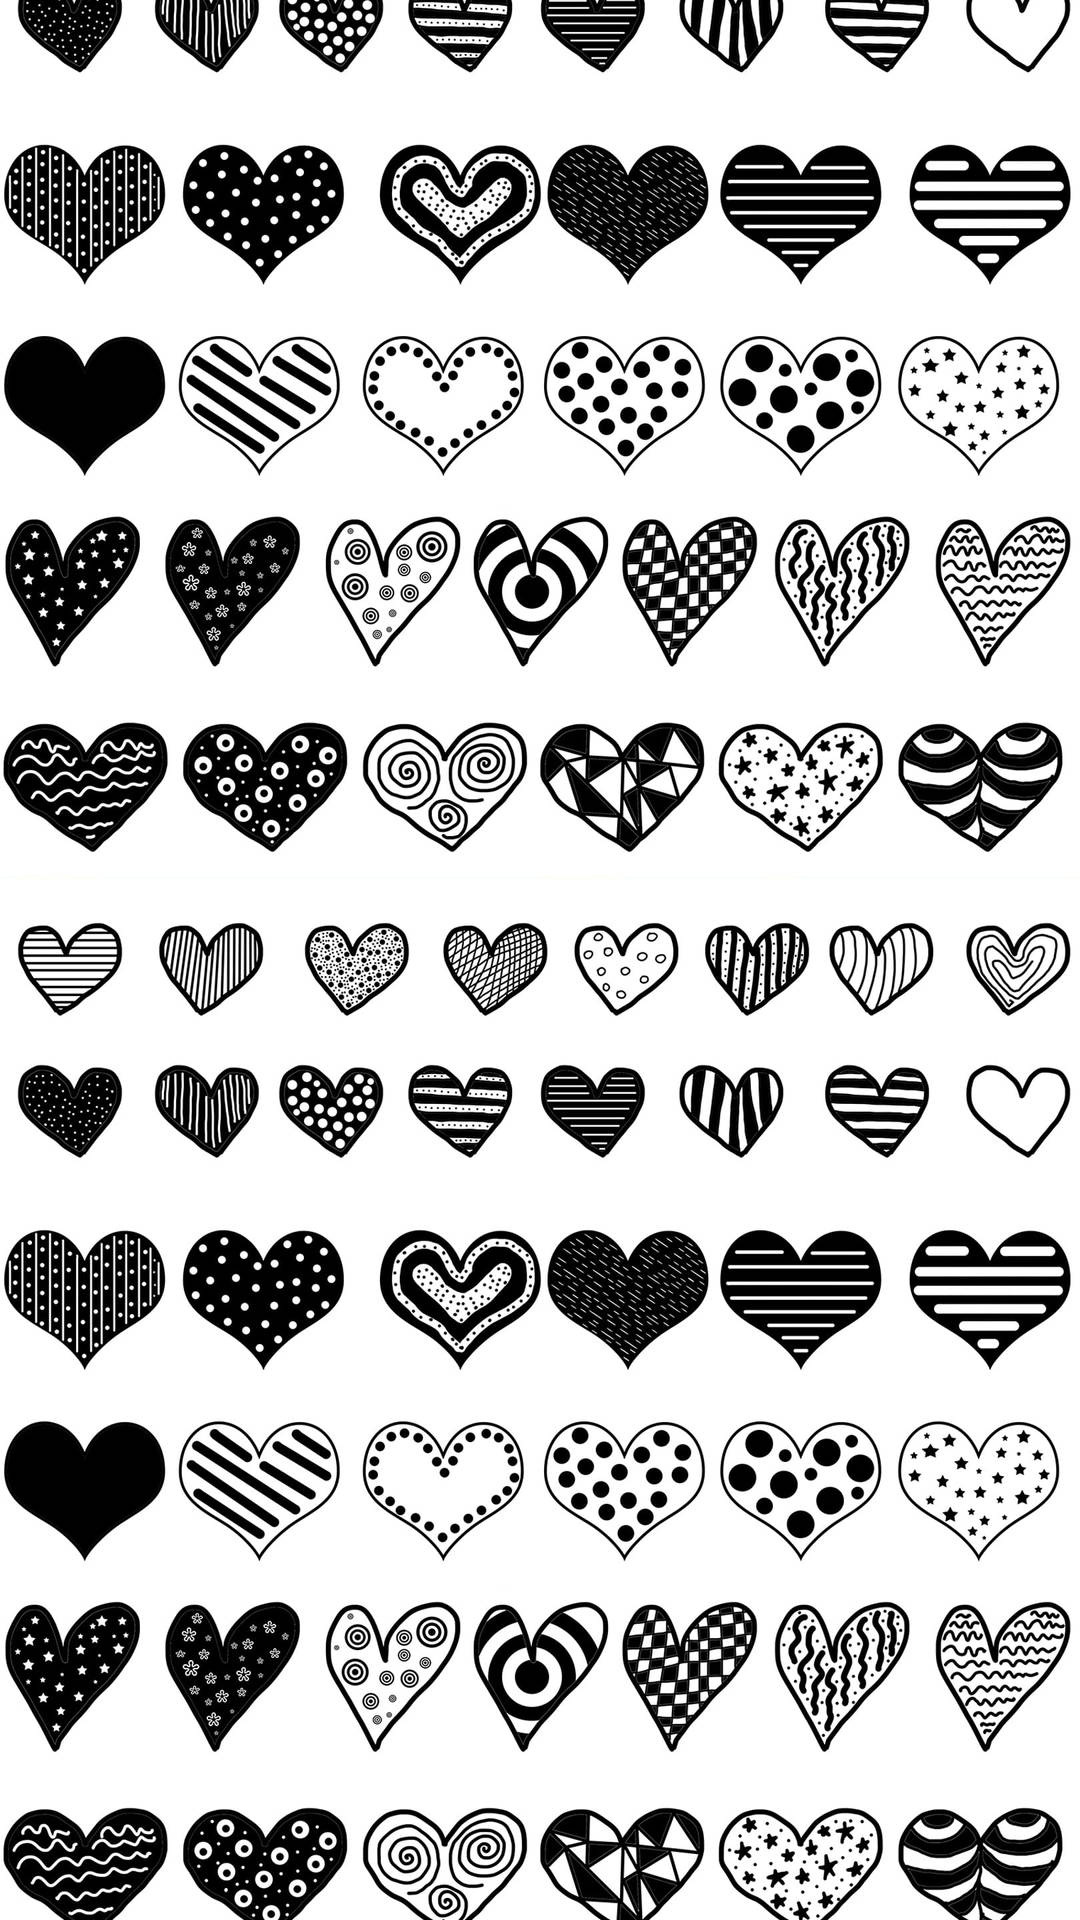 100+] Black And White Heart Background s 